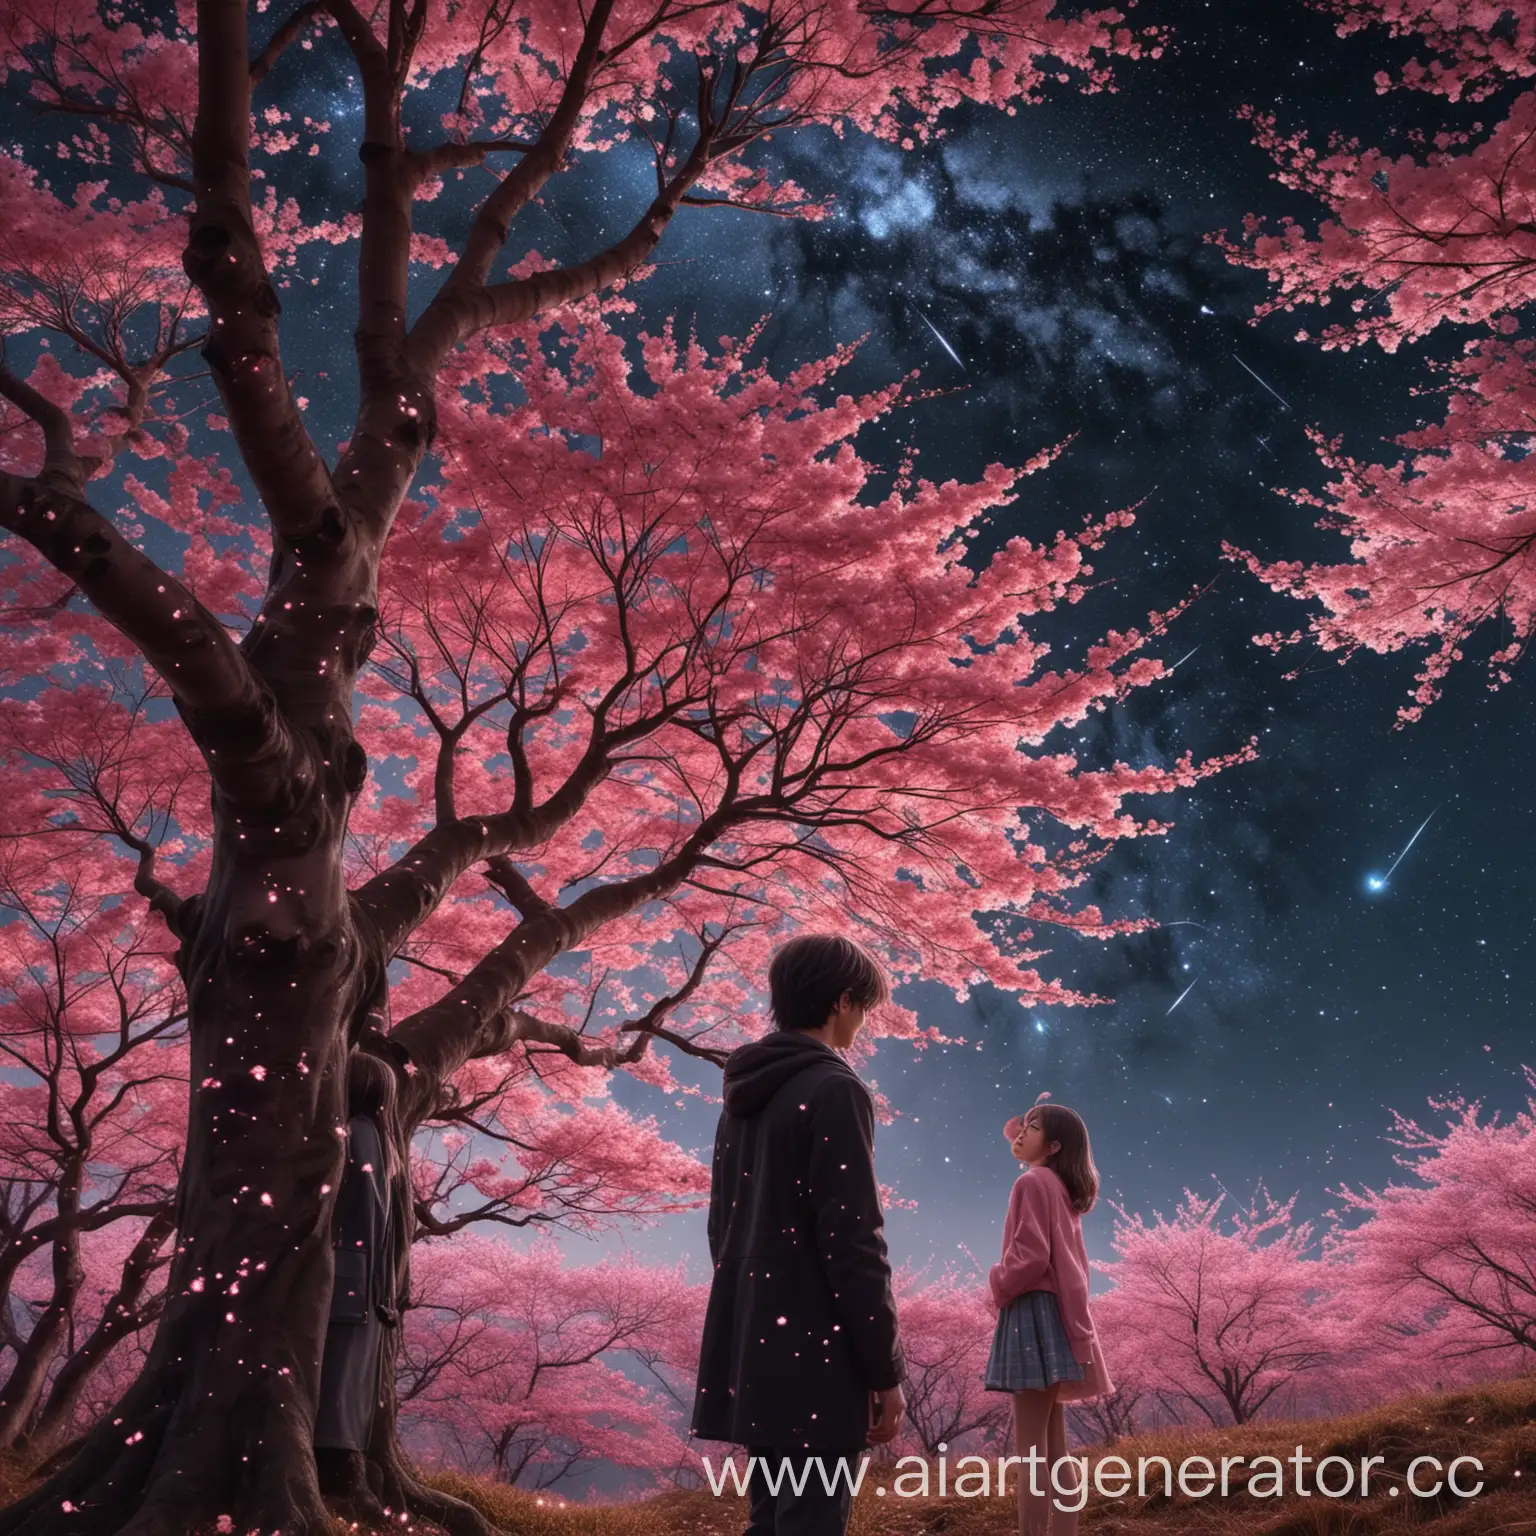 A guy stands by the hand with a girl with developing hair at a sakura tree with pink leaves, further away from them is a black forest, they look at the starry sky at the constellation cancer